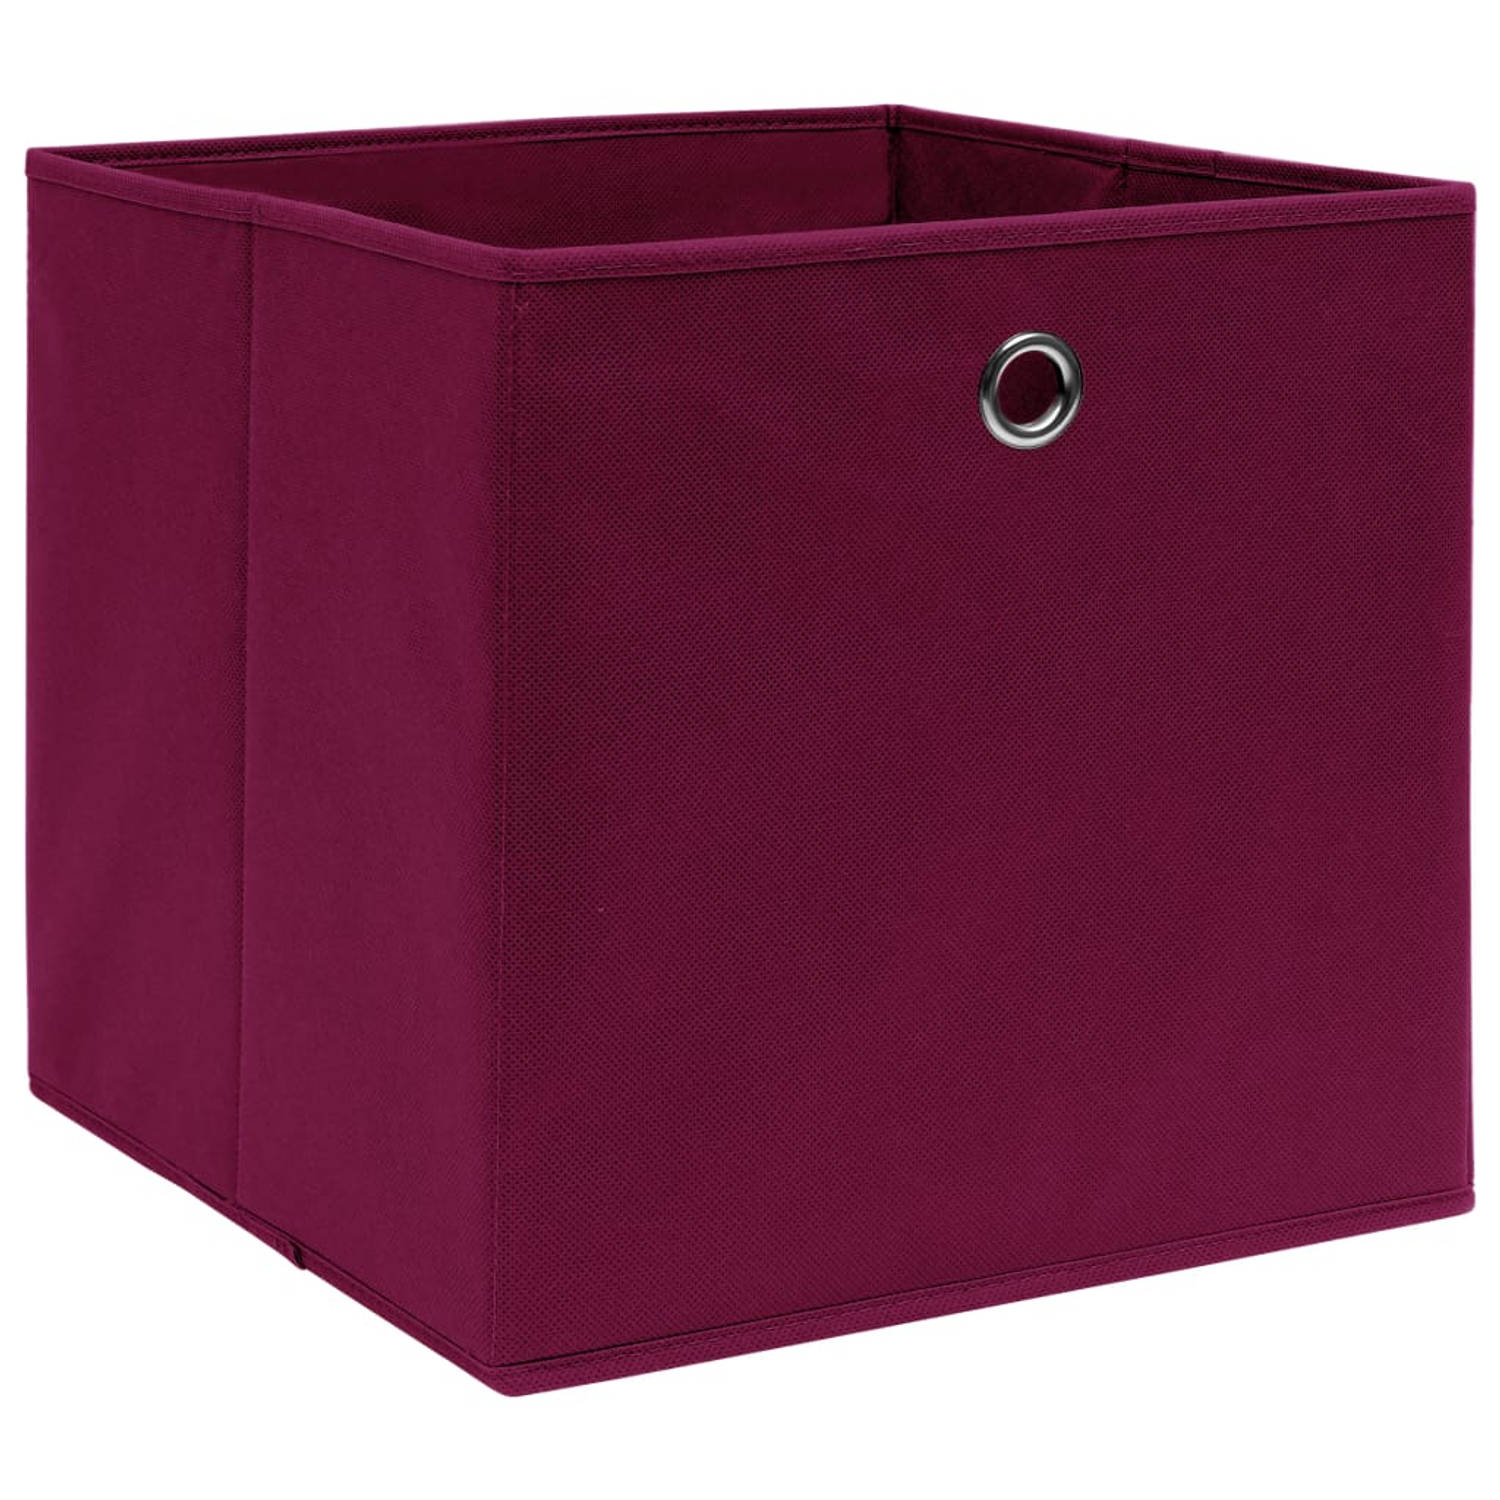 The Living Store Inklapbare opbergboxen - Nonwoven stof - 32 x 32 x 32 cm - Donkerrood